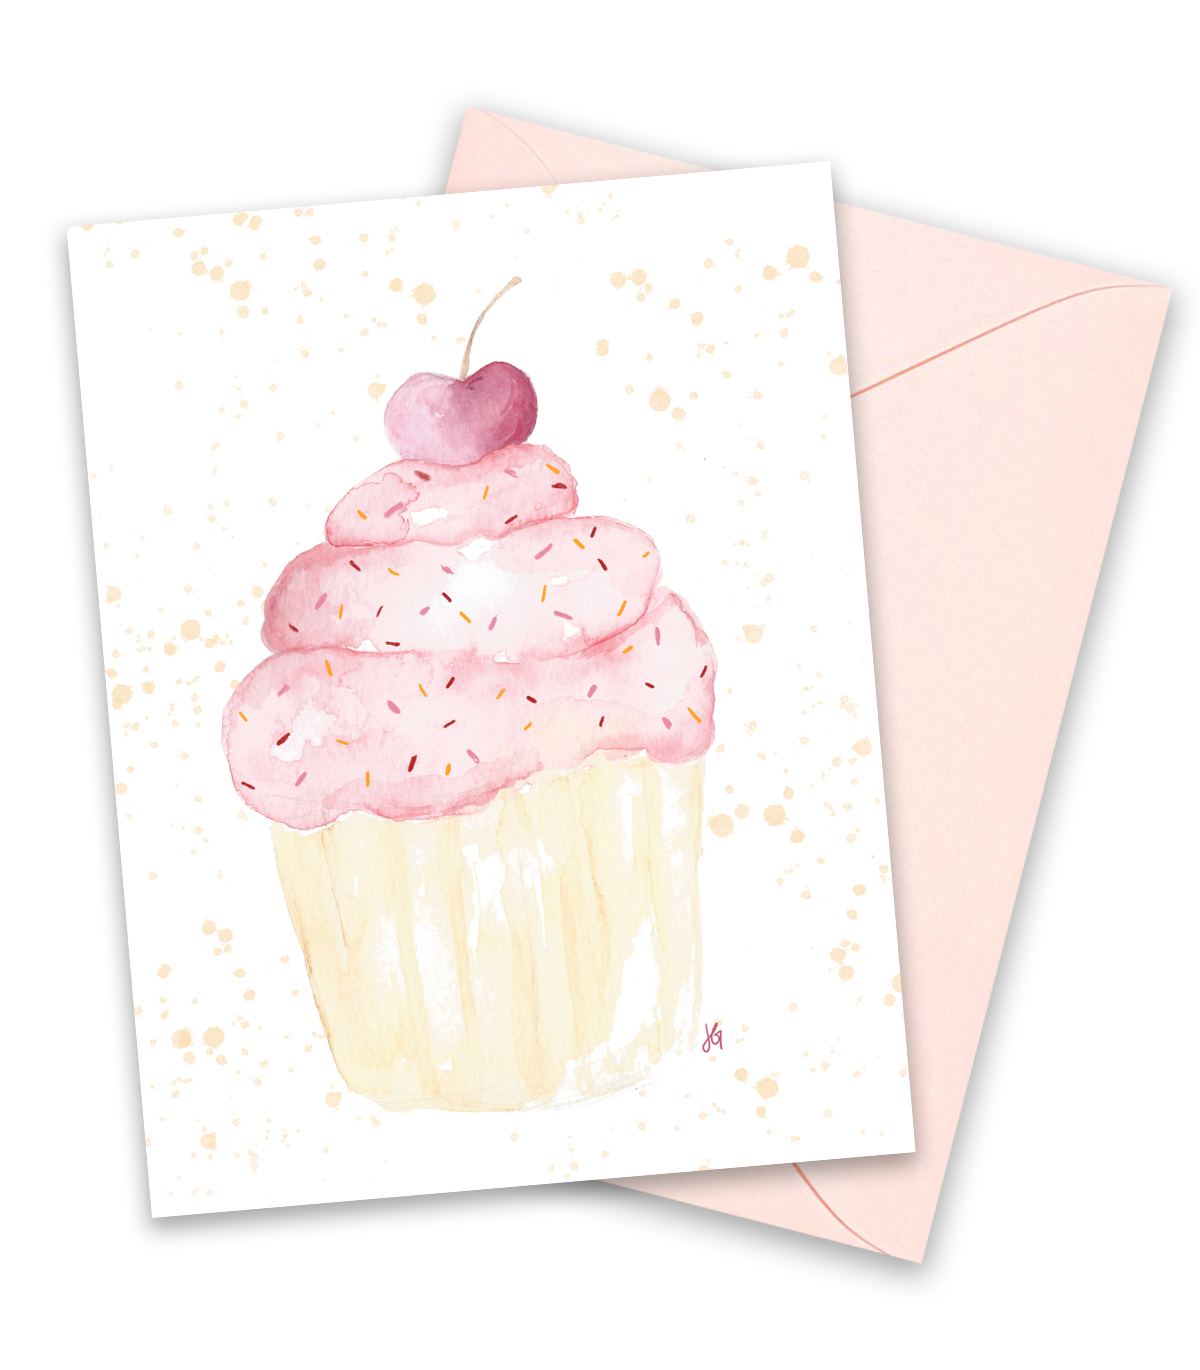 pink cupcake with a cherry on top, varying shades of pink and orange sprinkles, watercolor illustration greeting card, blank inside. 